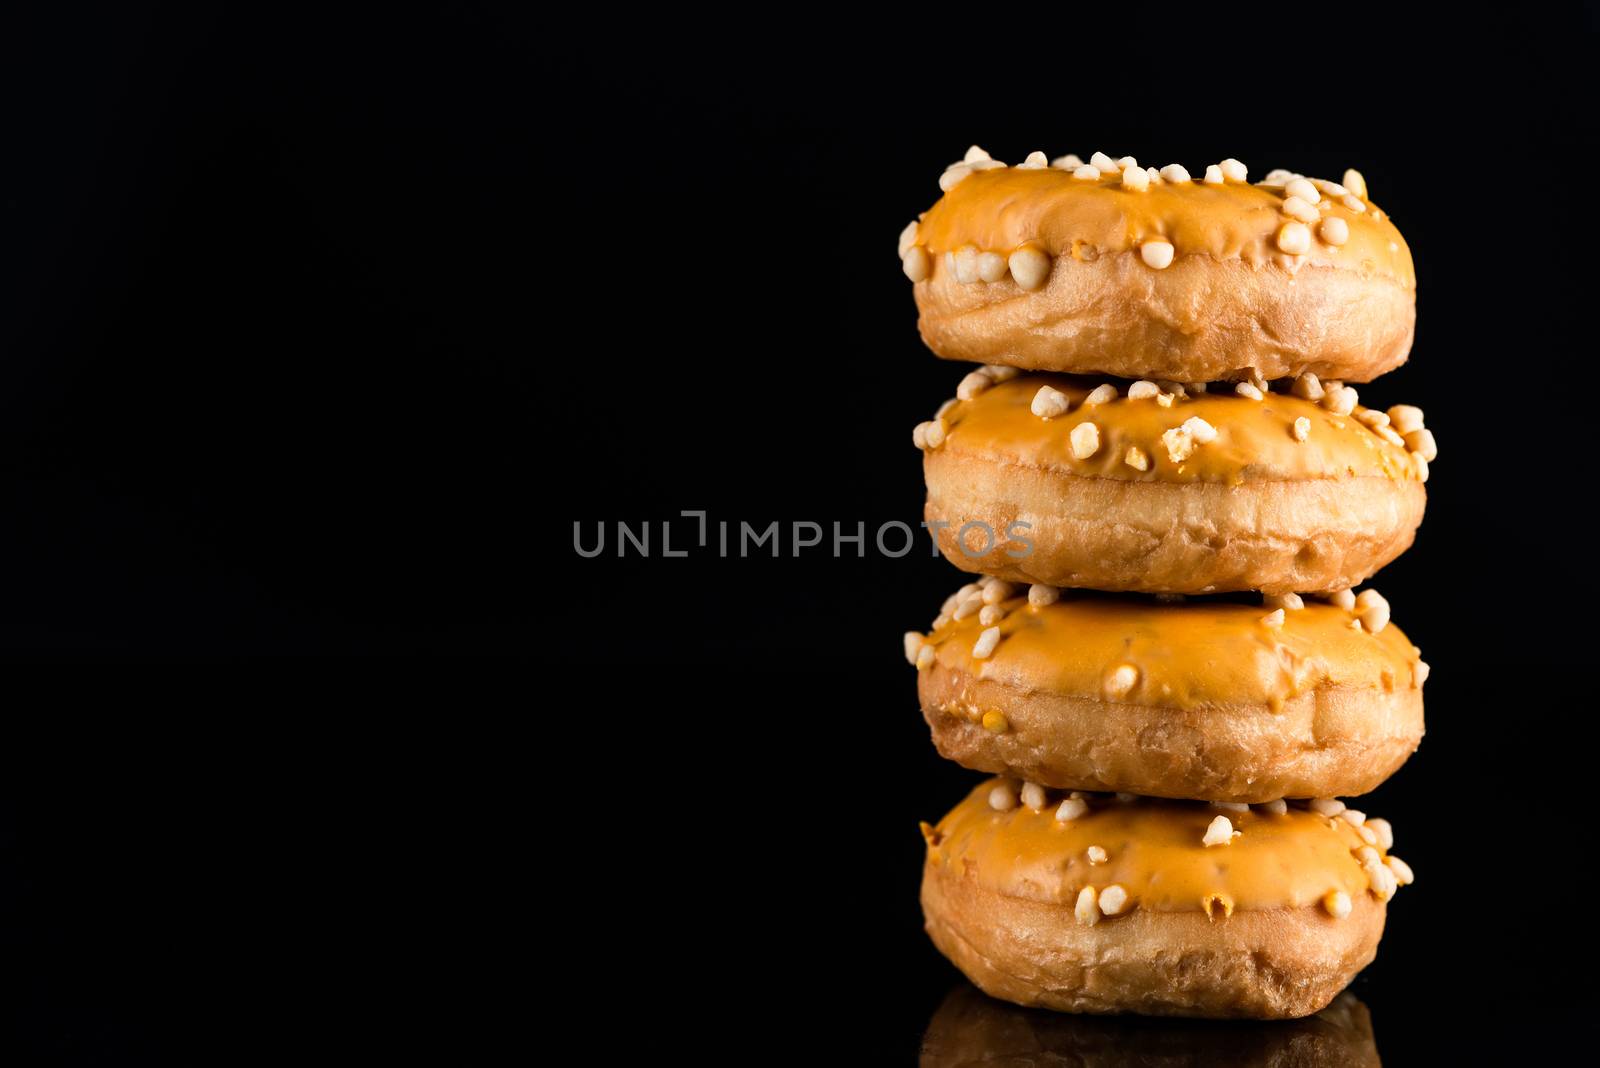 Stack of  Salted Caramel Donuts or Doughnuts on Black Background with Copy Space.